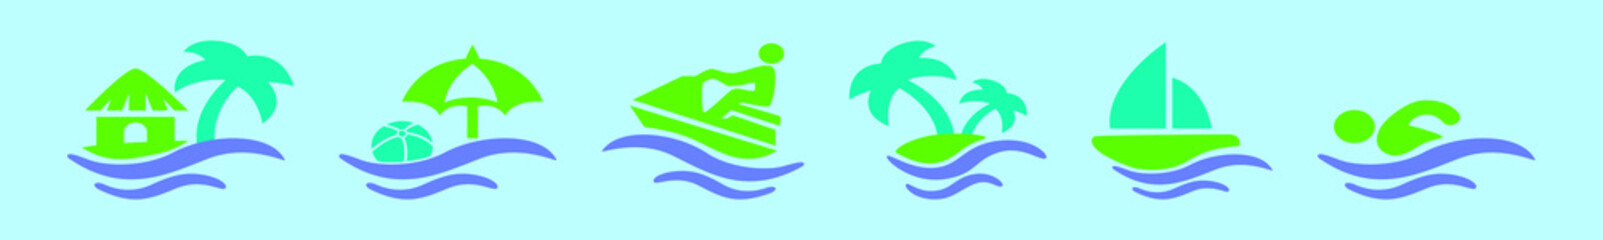 set of beach element cartoon icon design template with various models. vector illustration isolated on blue background